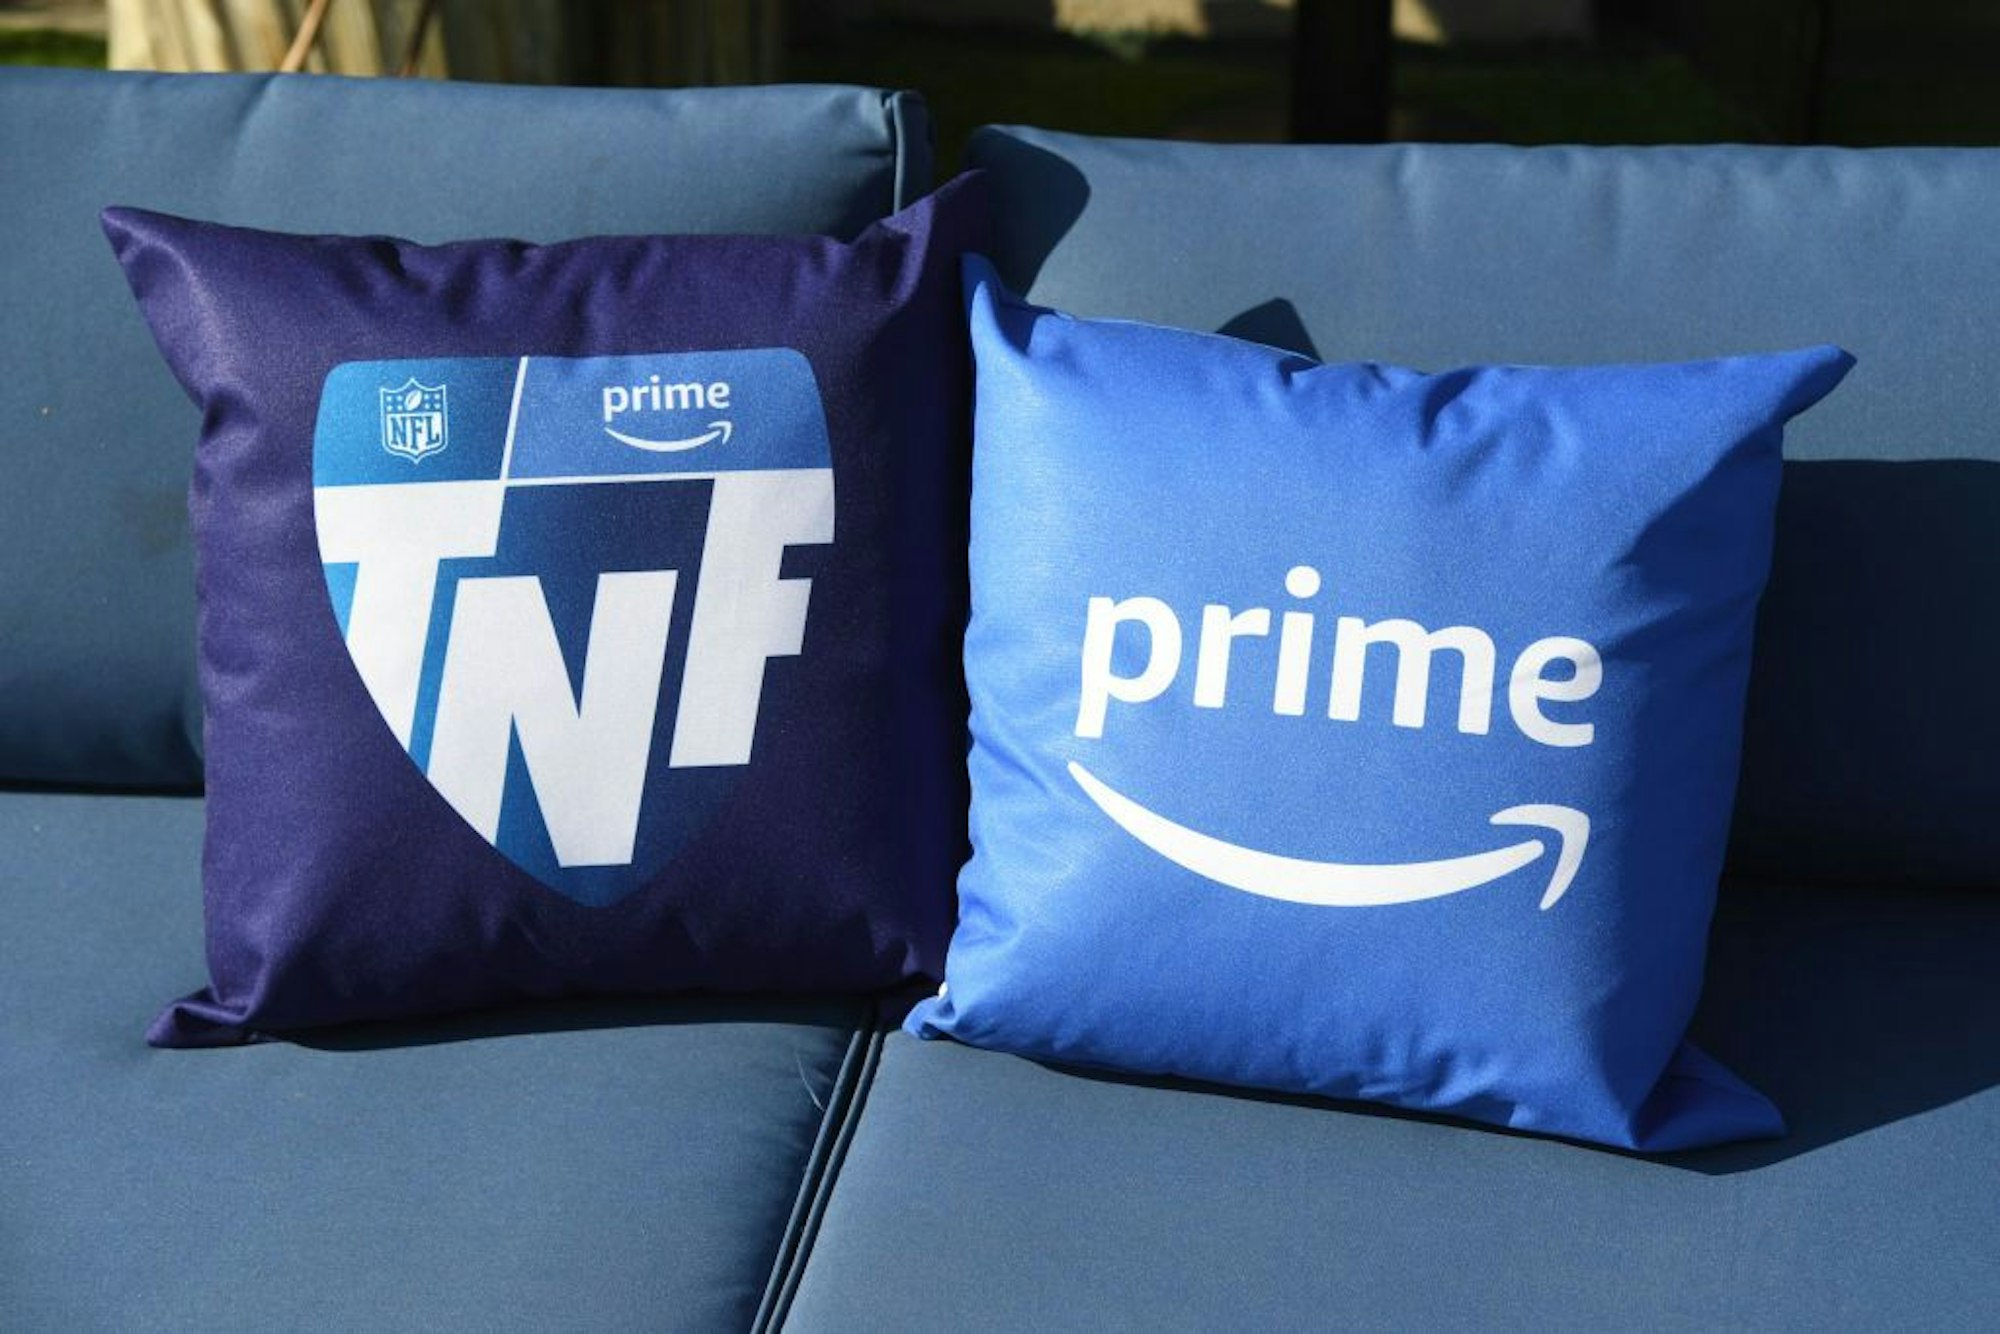 LOS ANGELES, CALIFORNIA - SEPTEMBER 15: A view of pillows during the “Thursday Night Football” Season Kickoff Party Hosted by Amazon Prime and Prime Video at The Fonda Theatre on September 15, 2022 in Los Angeles, California. (Photo by Jon Kopaloff/Getty Images Prime Video)